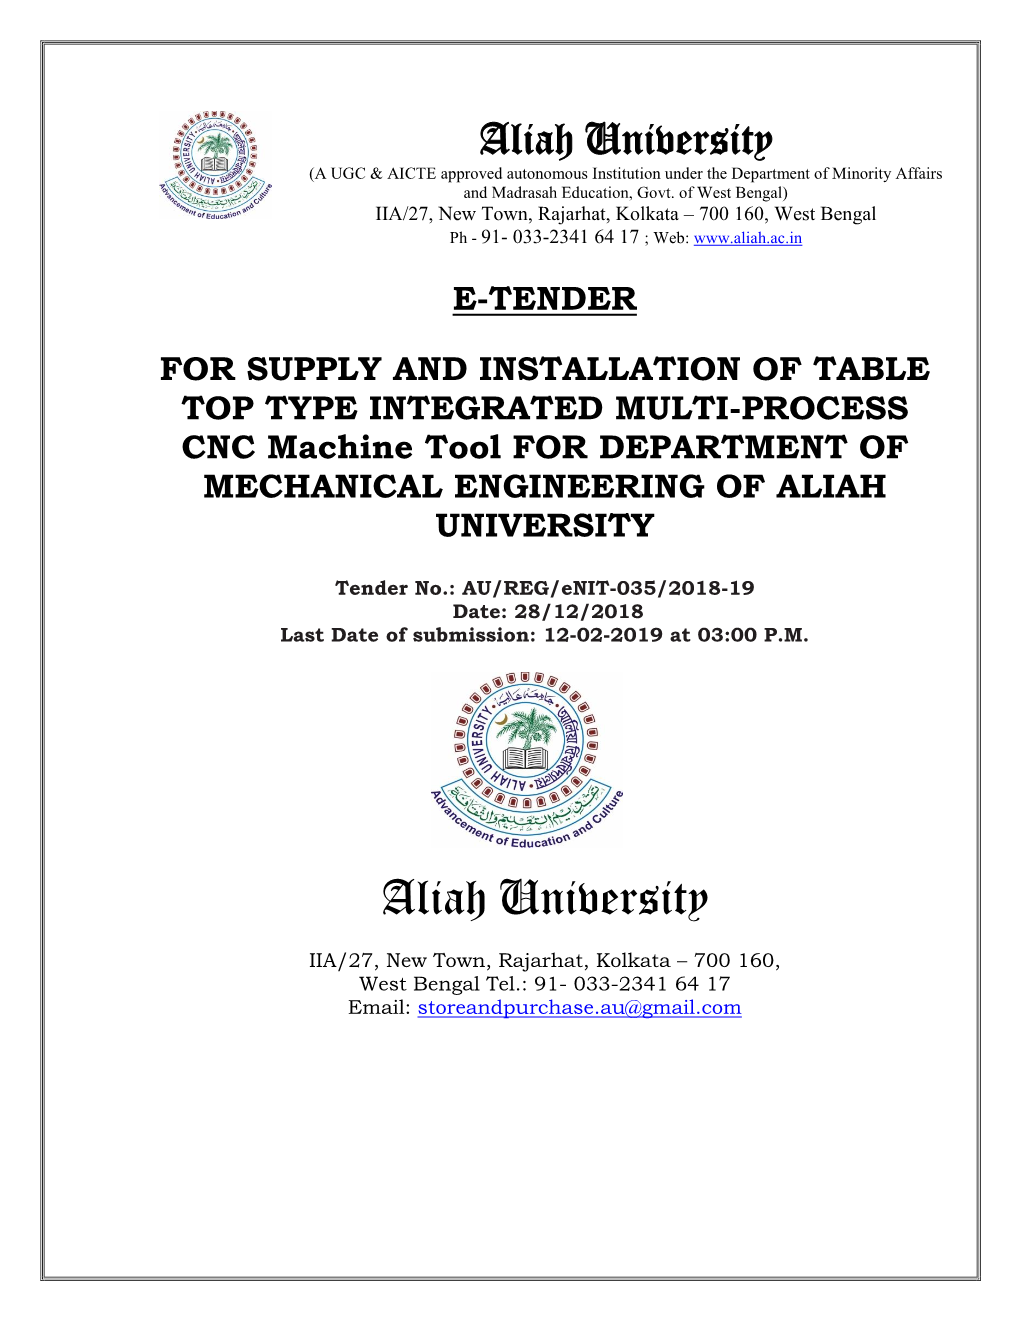 Aliah University (A UGC & AICTE Approved Autonomous Institution Under the Department of Minority Affairs and Madrasah Education, Govt